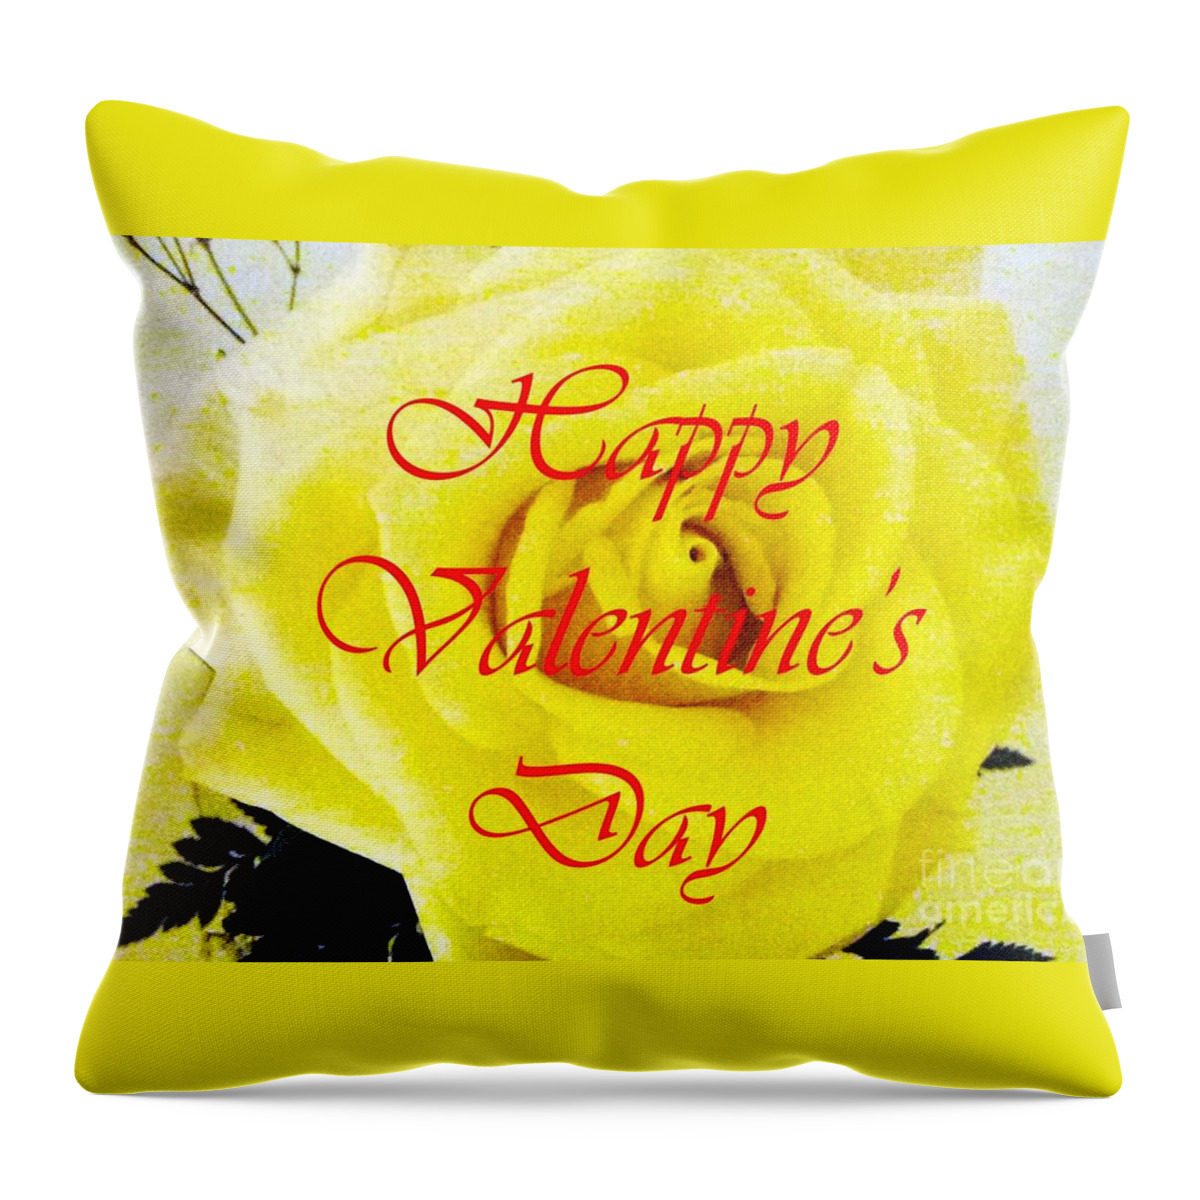 Happy Valentine's Day Throw Pillow featuring the photograph Happy Valentine's Day by Barbie Corbett-Newmin